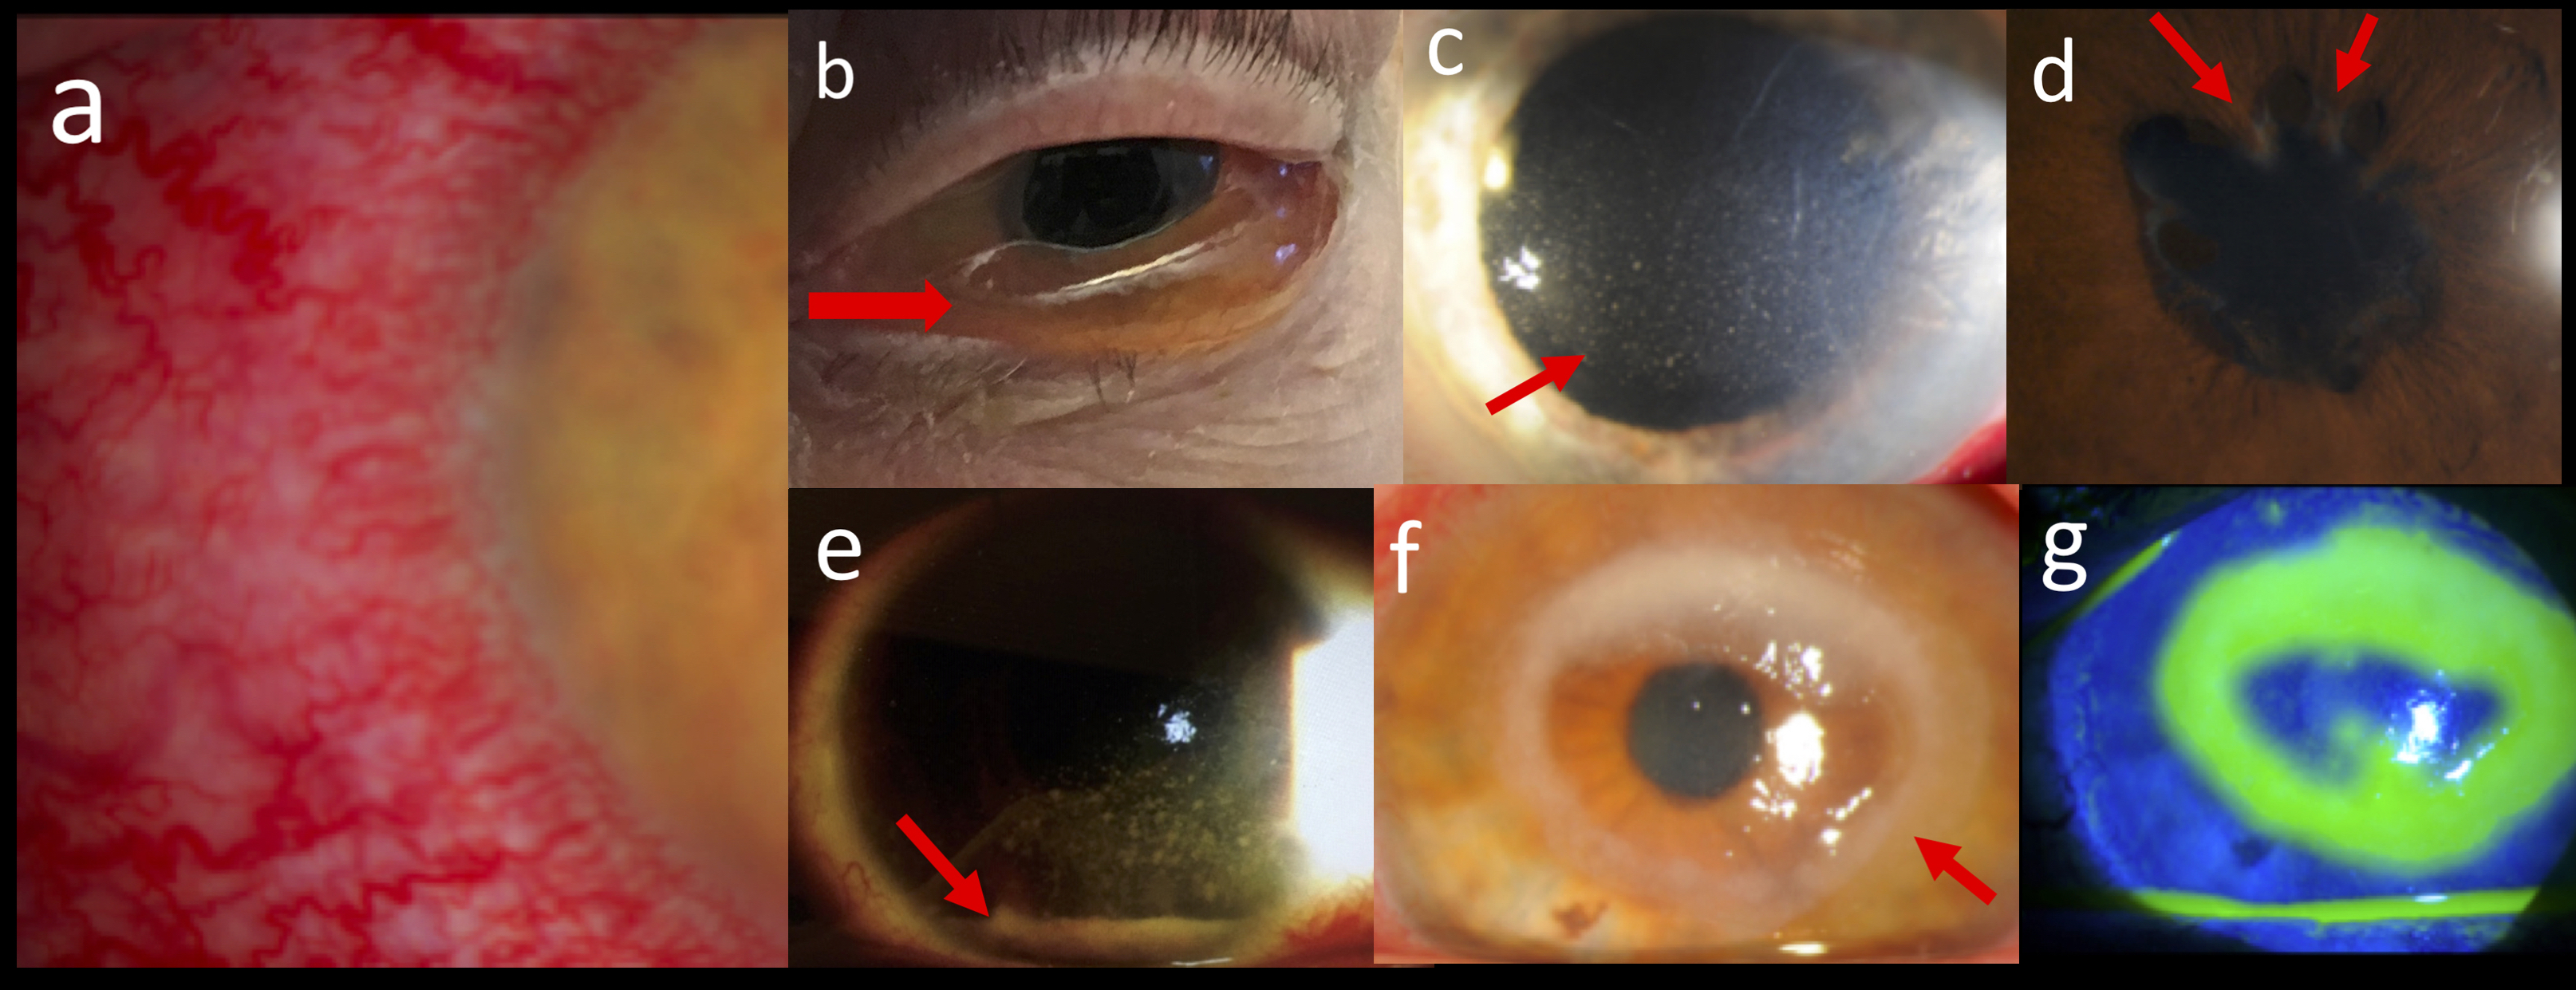 Important findings in differentiating a red, painful eye: (a) Ciliary flush, (b) chemosis (red arrow), (c) keratic precipitates (red arrow), (d) posterior synechiae (red arrows), (e) hypopyn (red arrow), (f) ring infiltrate (red arrow), and (g) fluorescein staining of ulcer found in (f).
